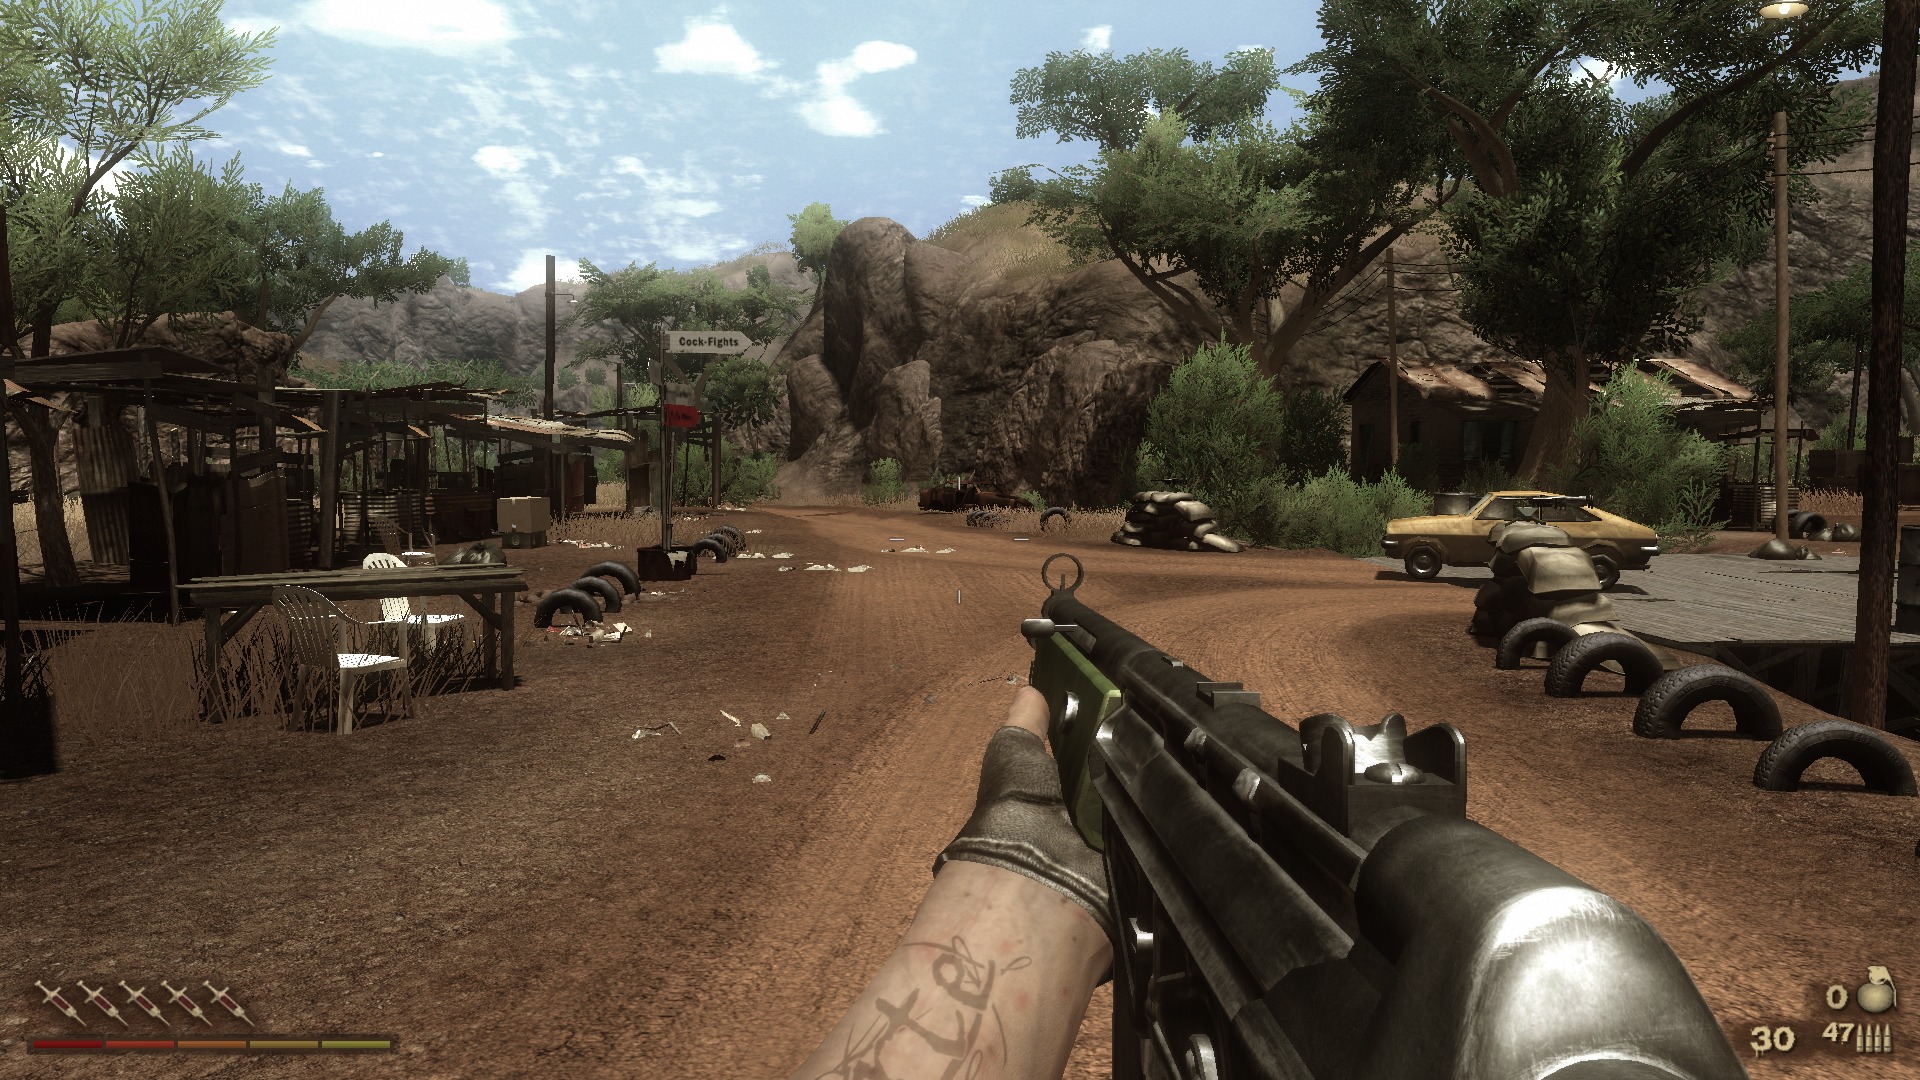 far cry 2 for pc